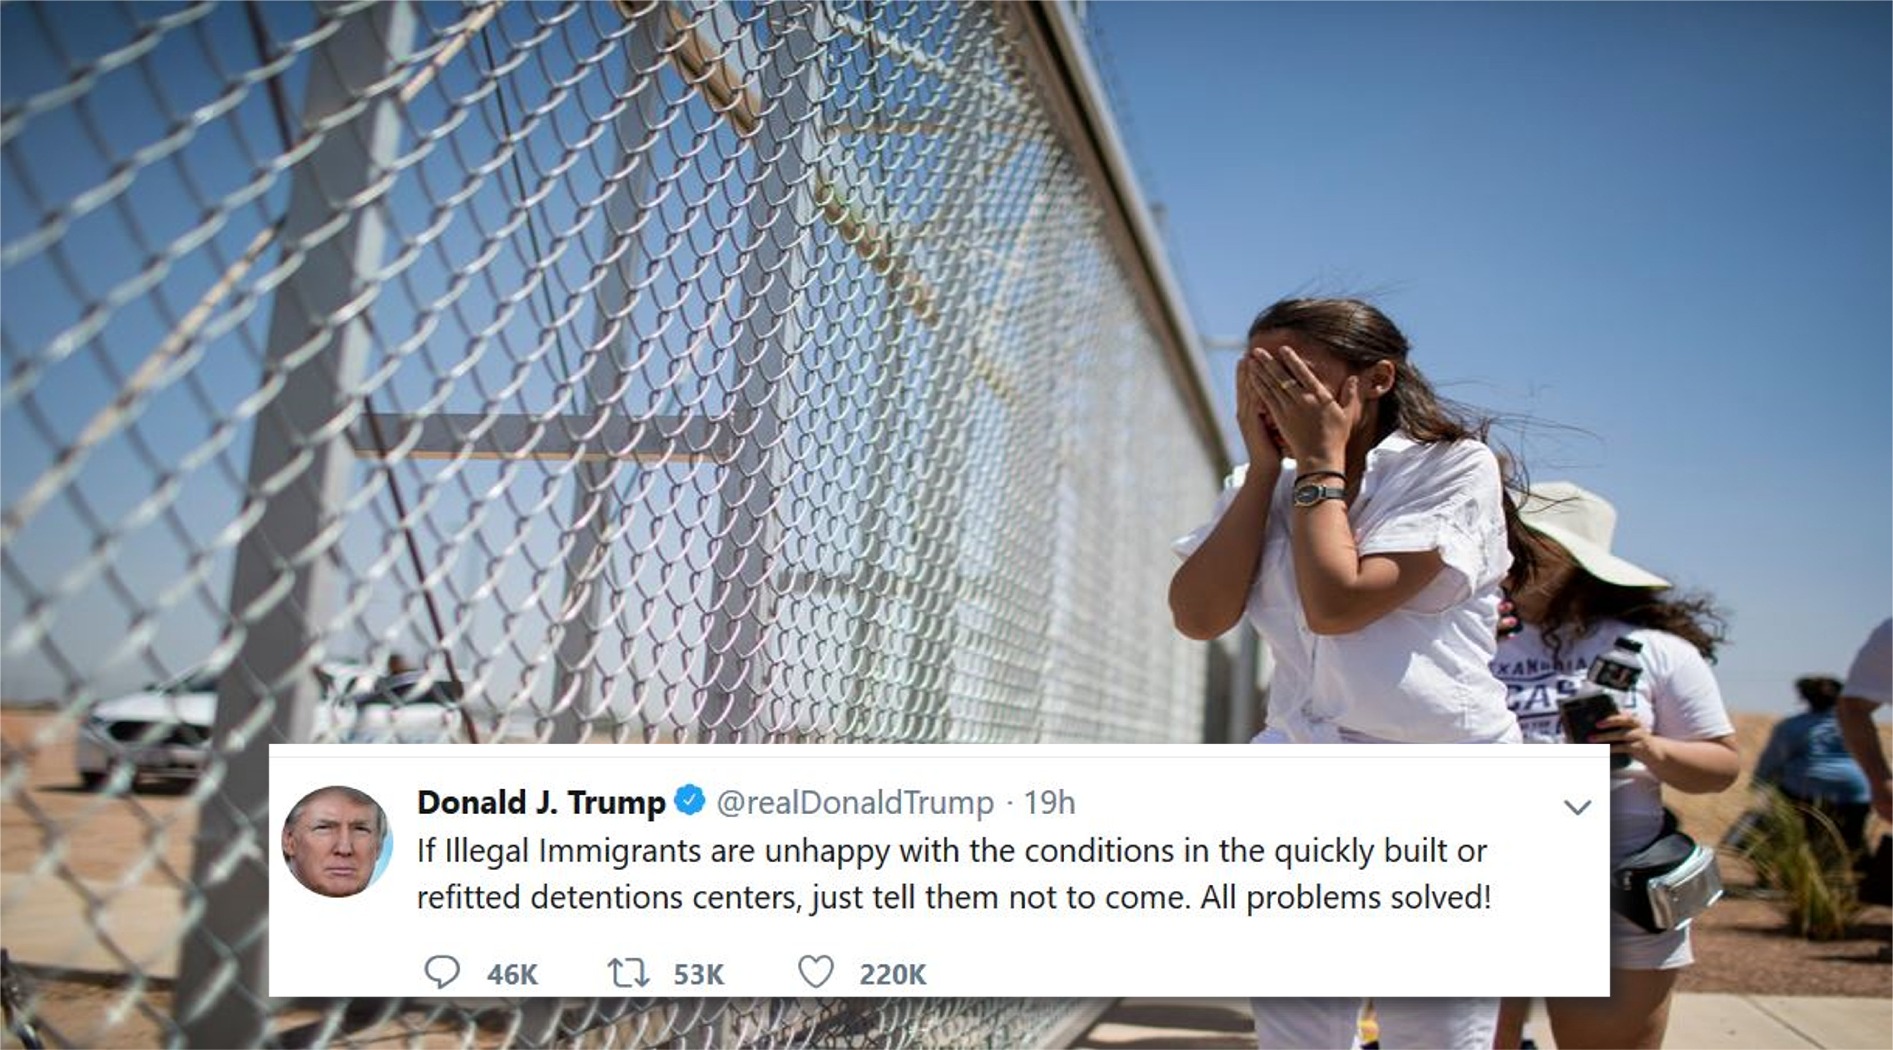 aoc fence - Donald J. Trump Trump 19h If illegal immigrants are unhappy with the conditions in the quickly built or refitted detentions centers, just tell them not to come. All problems solved! 46